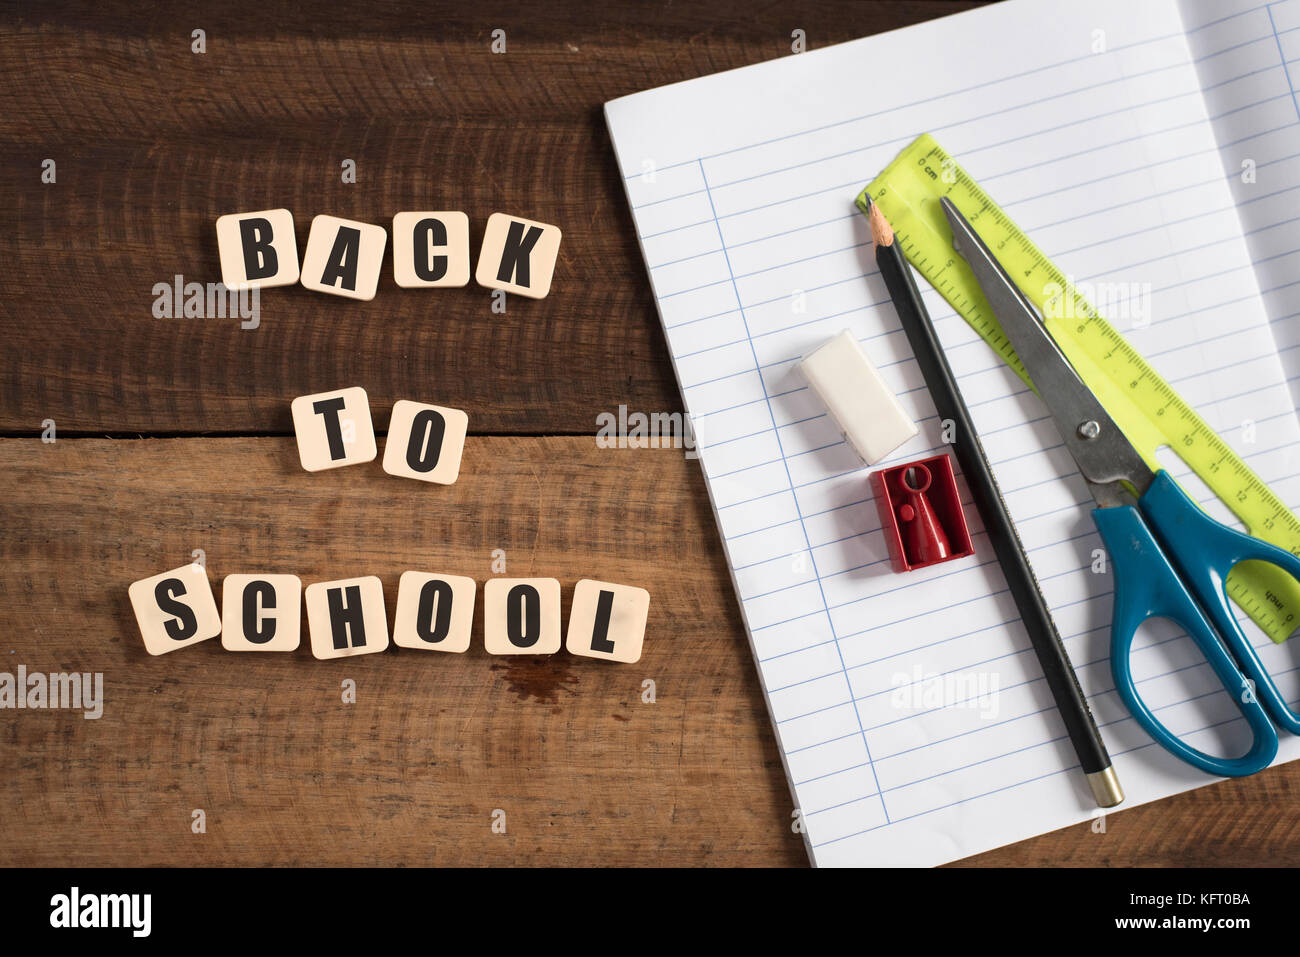 back to school concept - book,pen,ruler,eraser and pencil sharpener on a wooden table Stock Photo